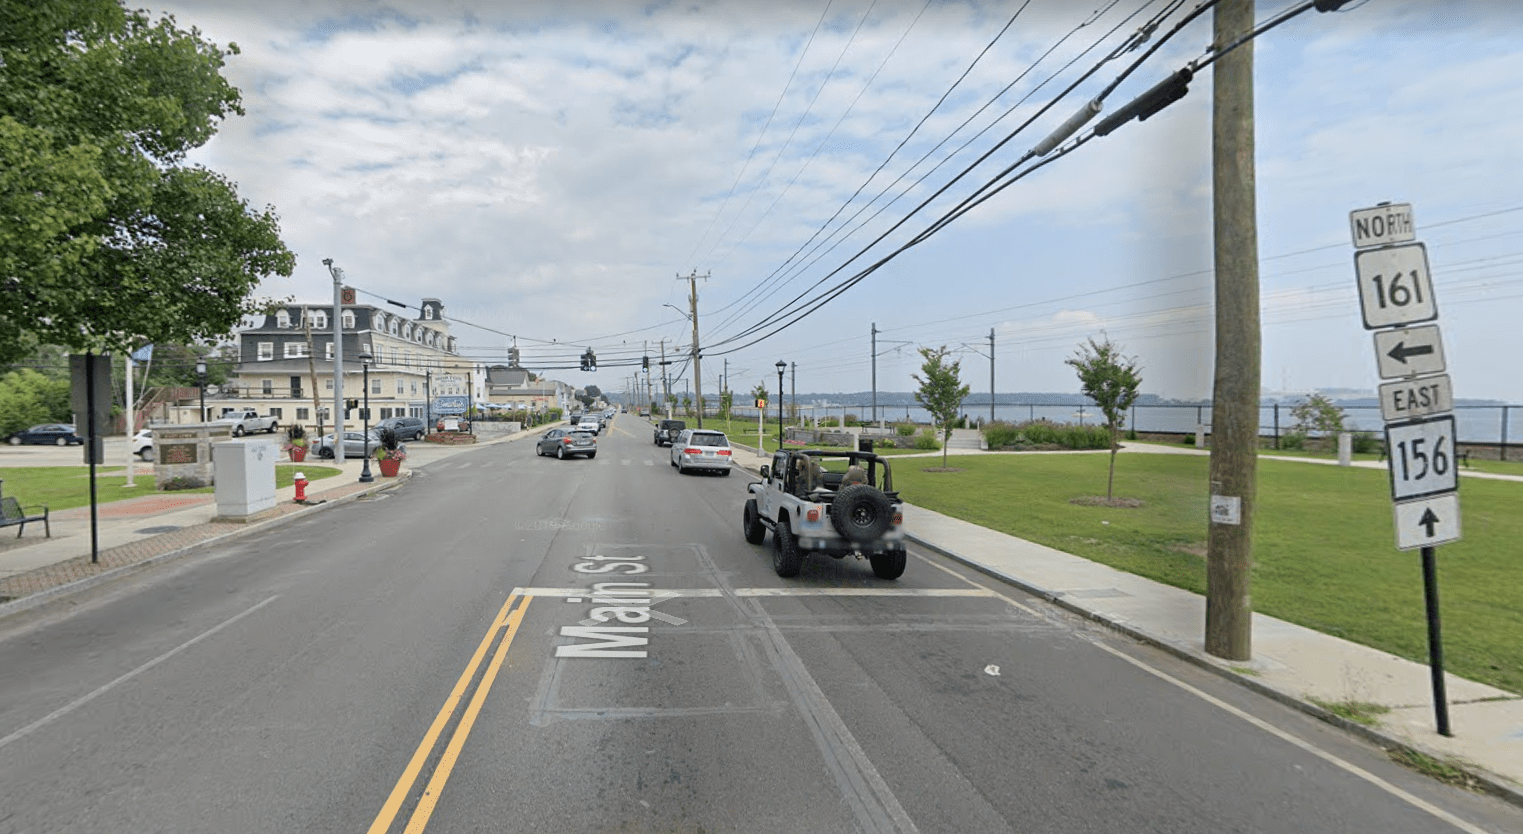 East Lyme Plans for Two Additional Officers and LongTerm Increases in